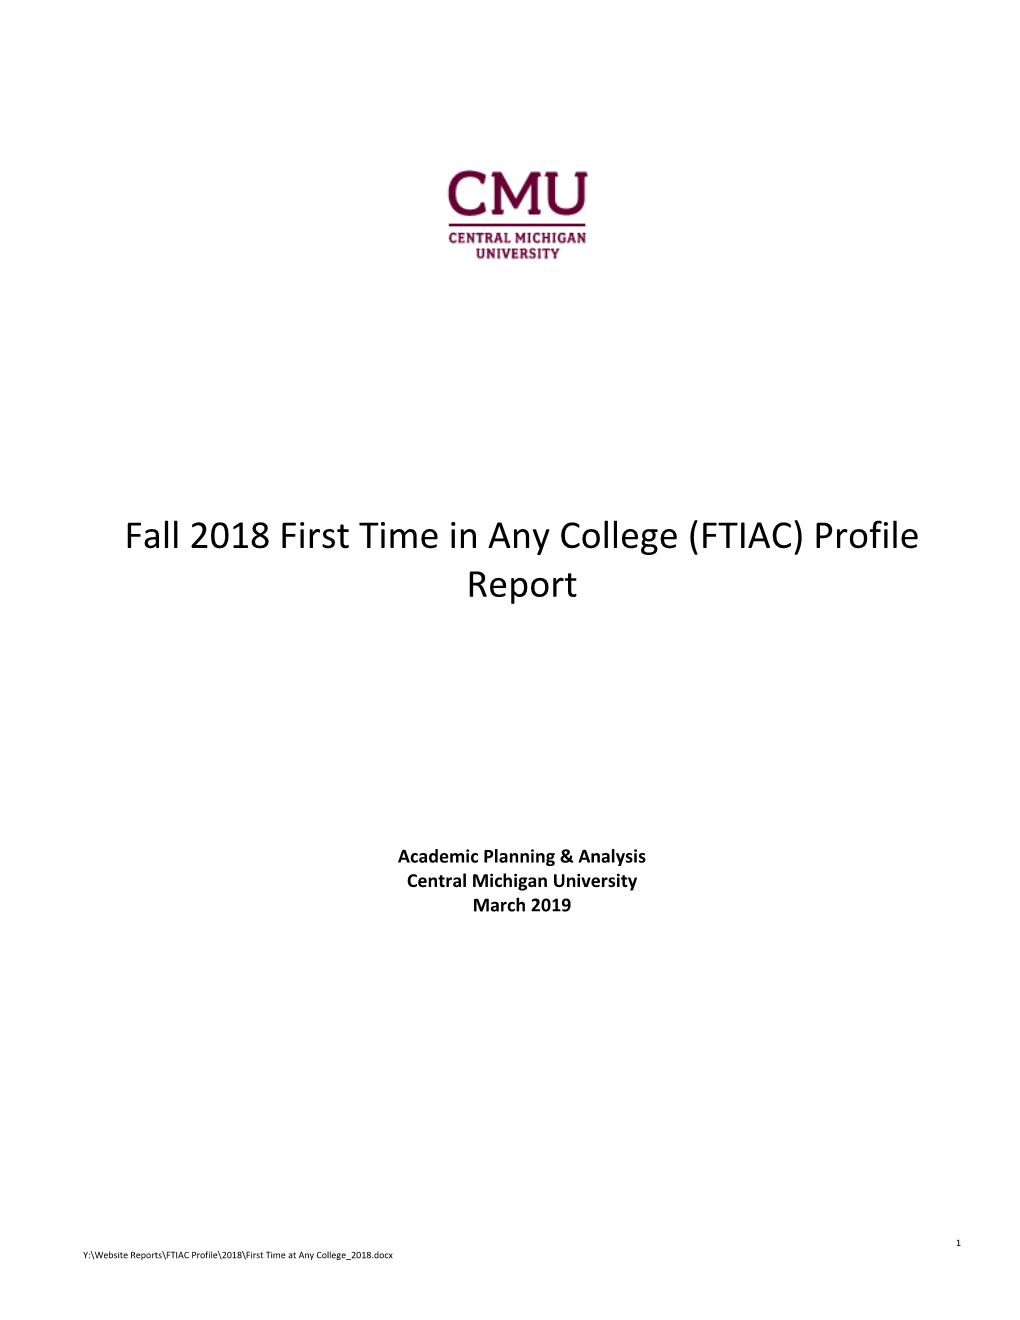 Fall 2018 First Time in Any College (FTIAC) Profile Report